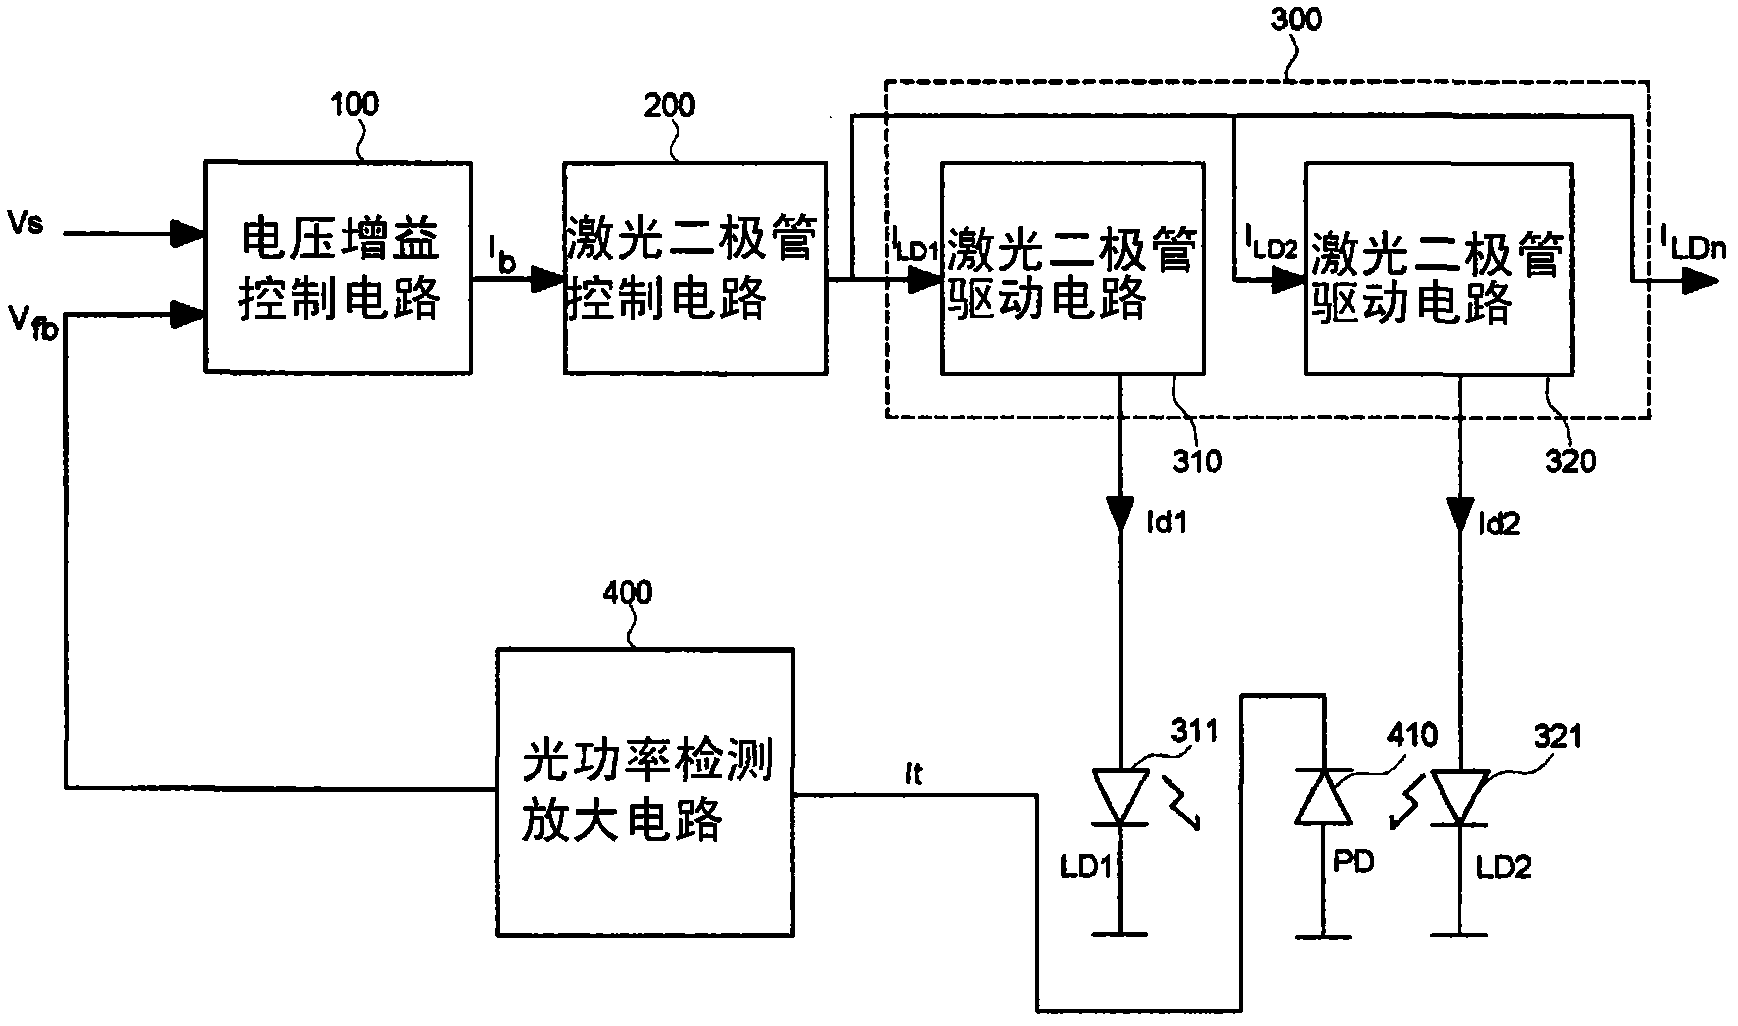 Laser diode control device with good stability